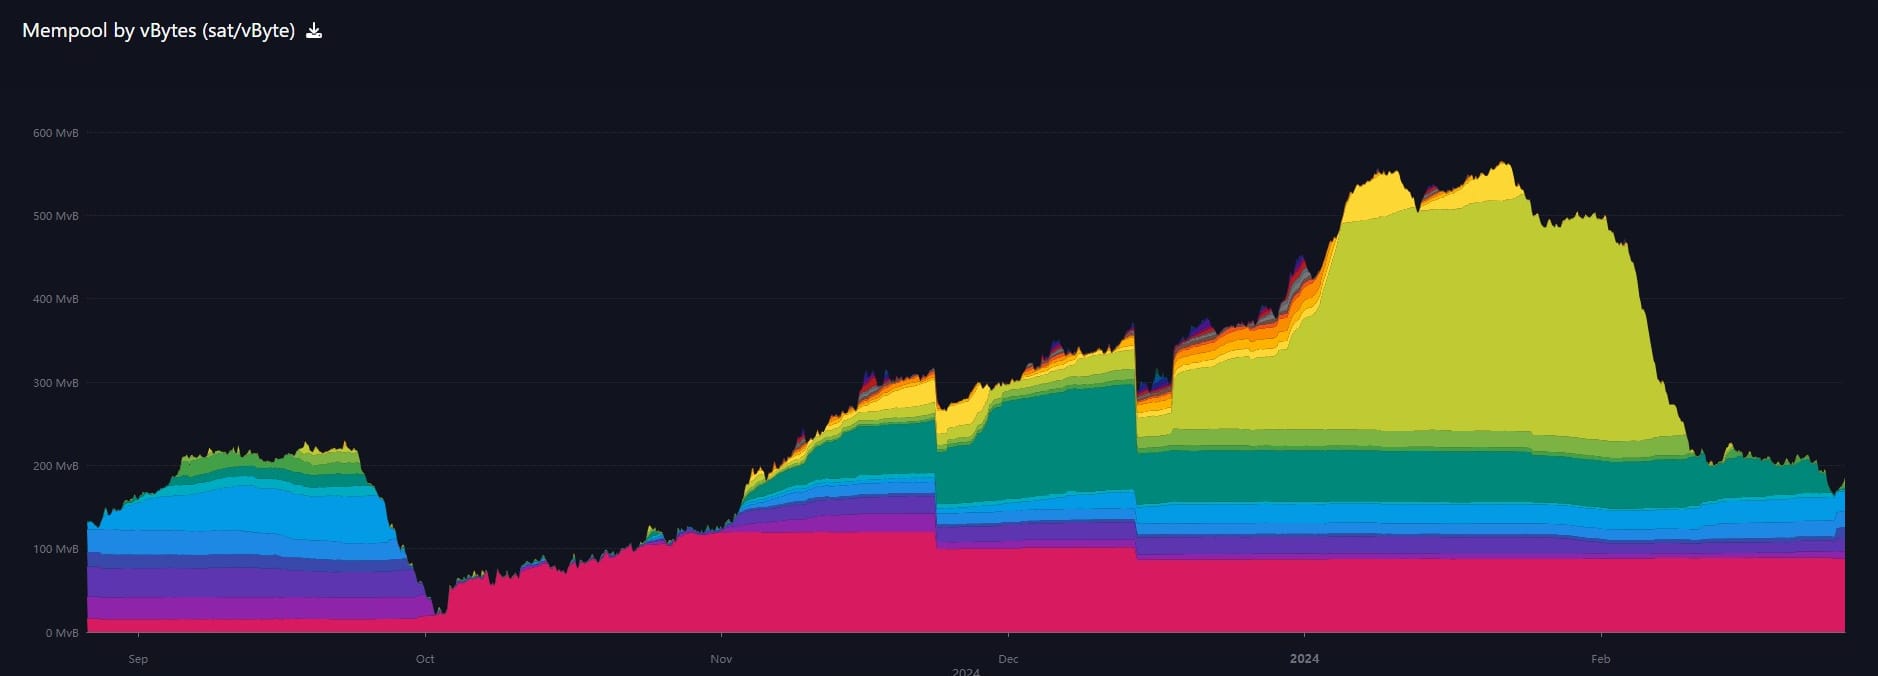 6-month chart of mempool, mempool.space